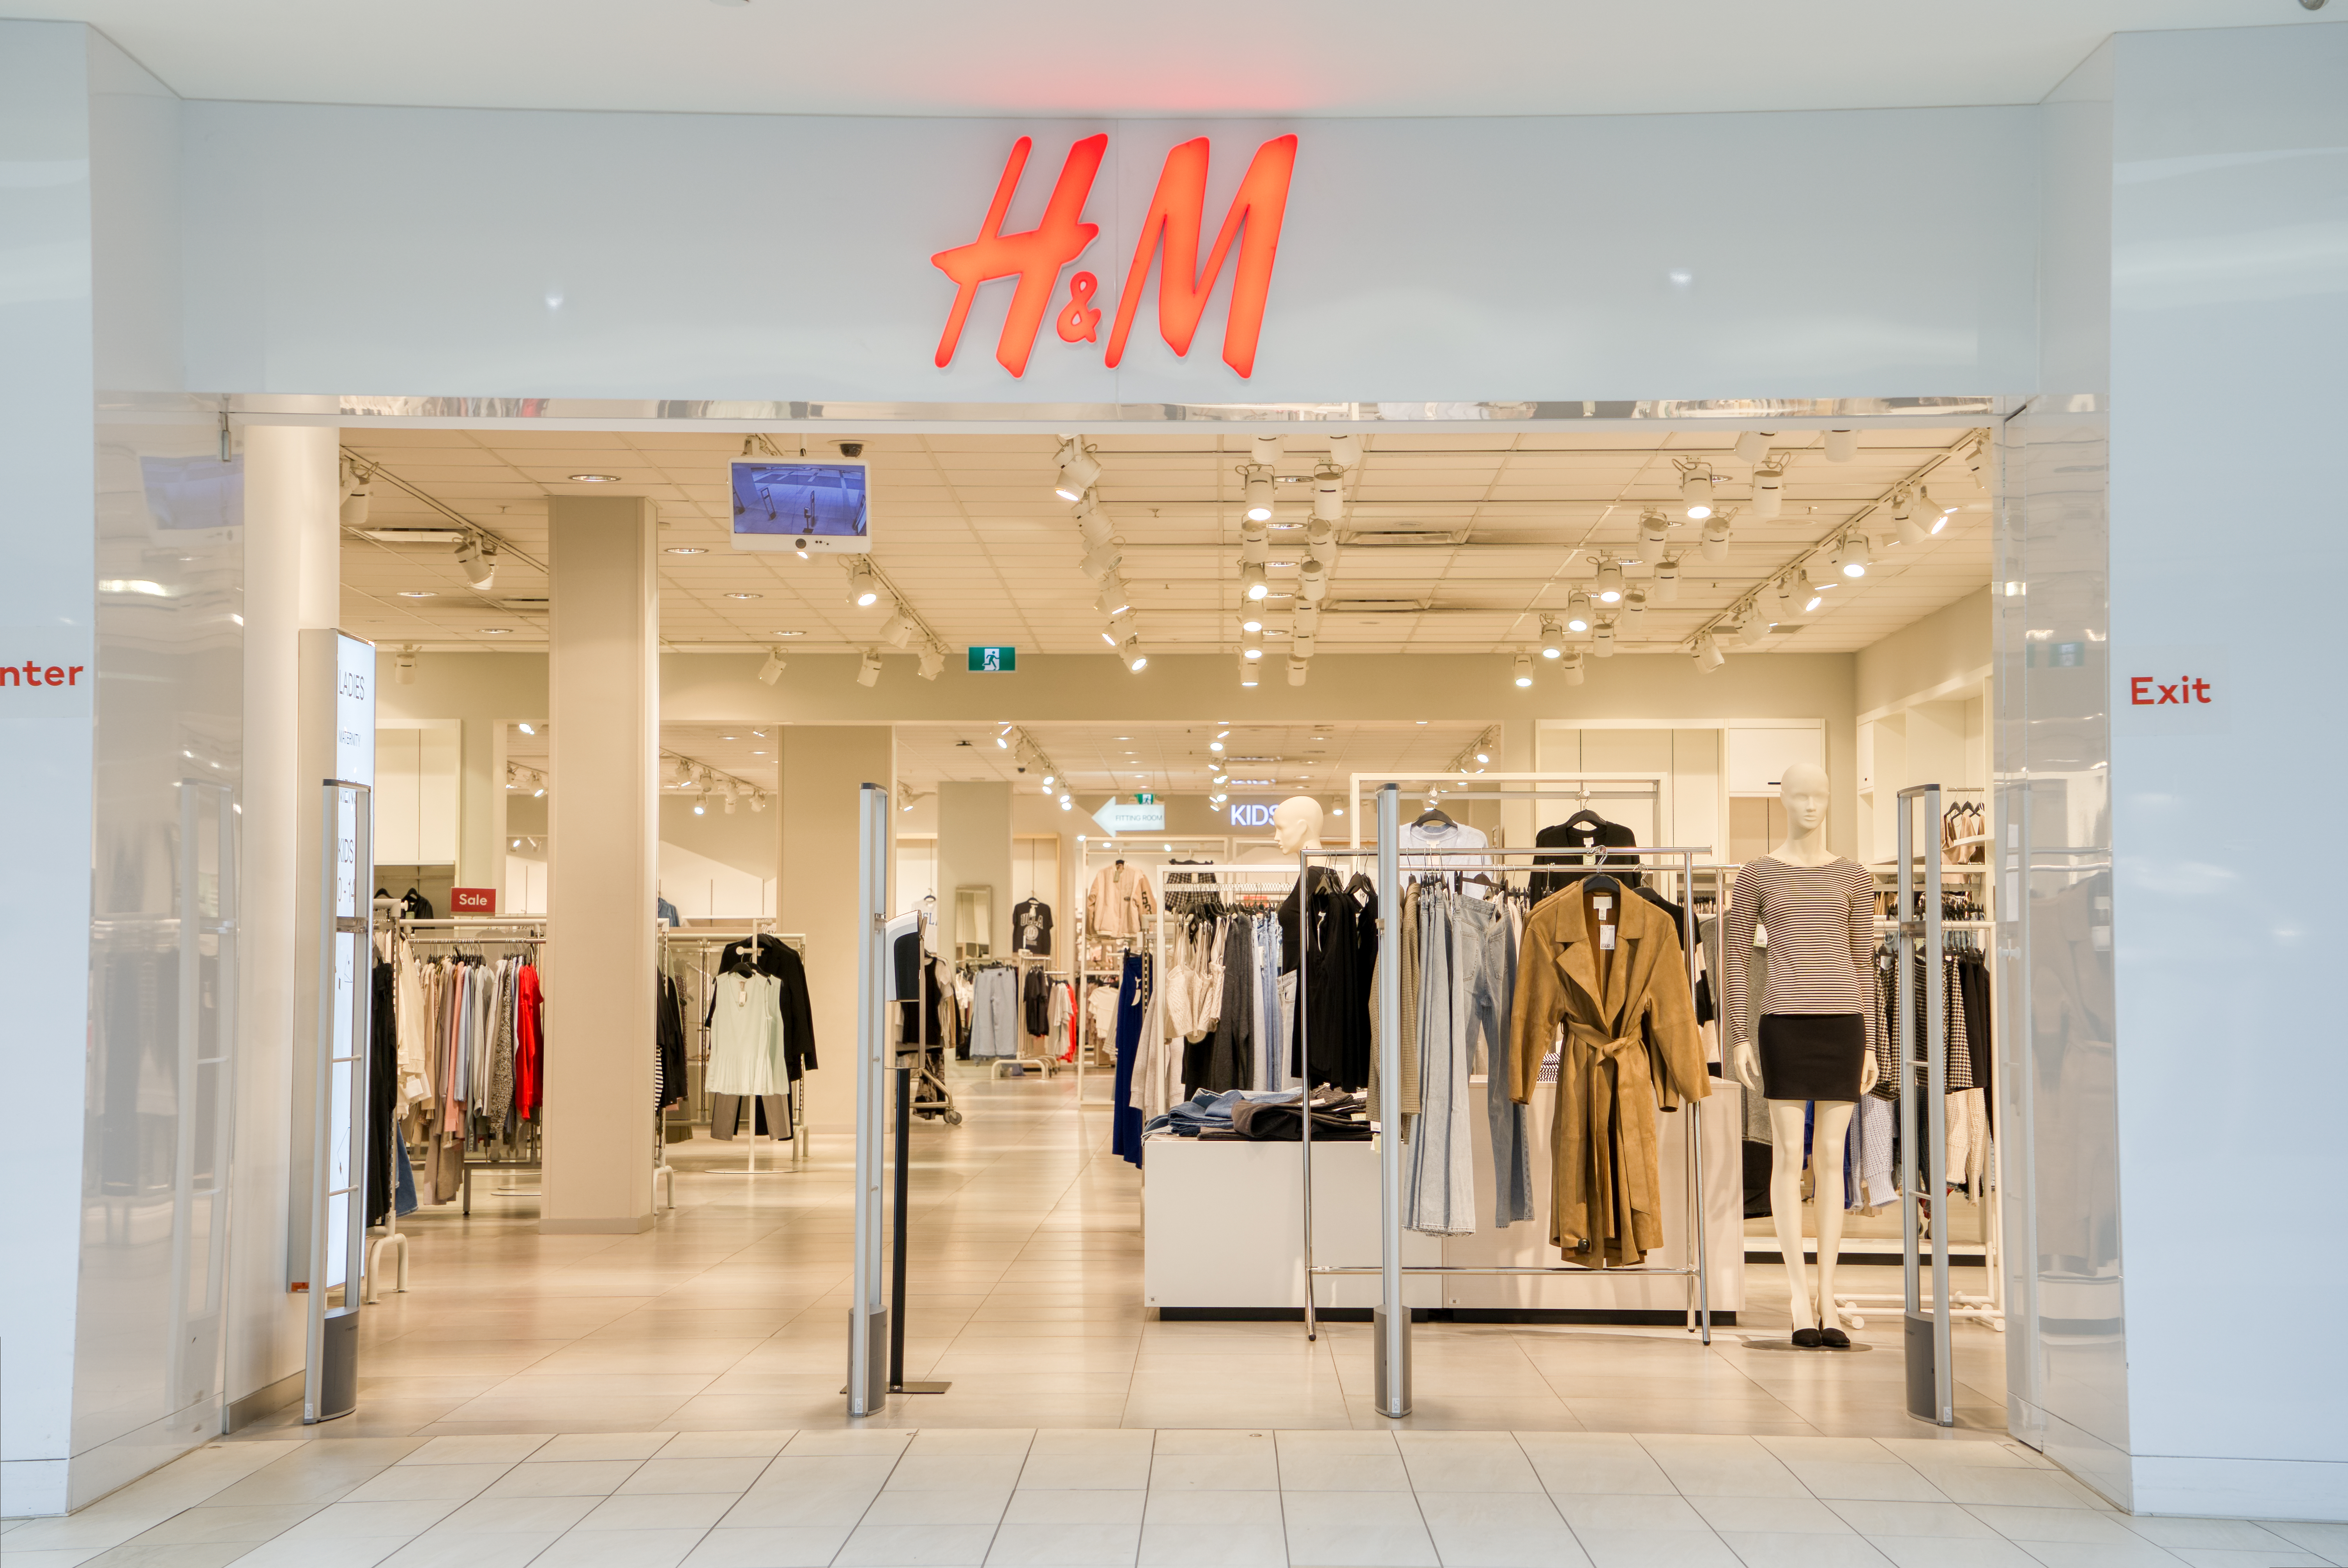 H&m Store Photos and Images